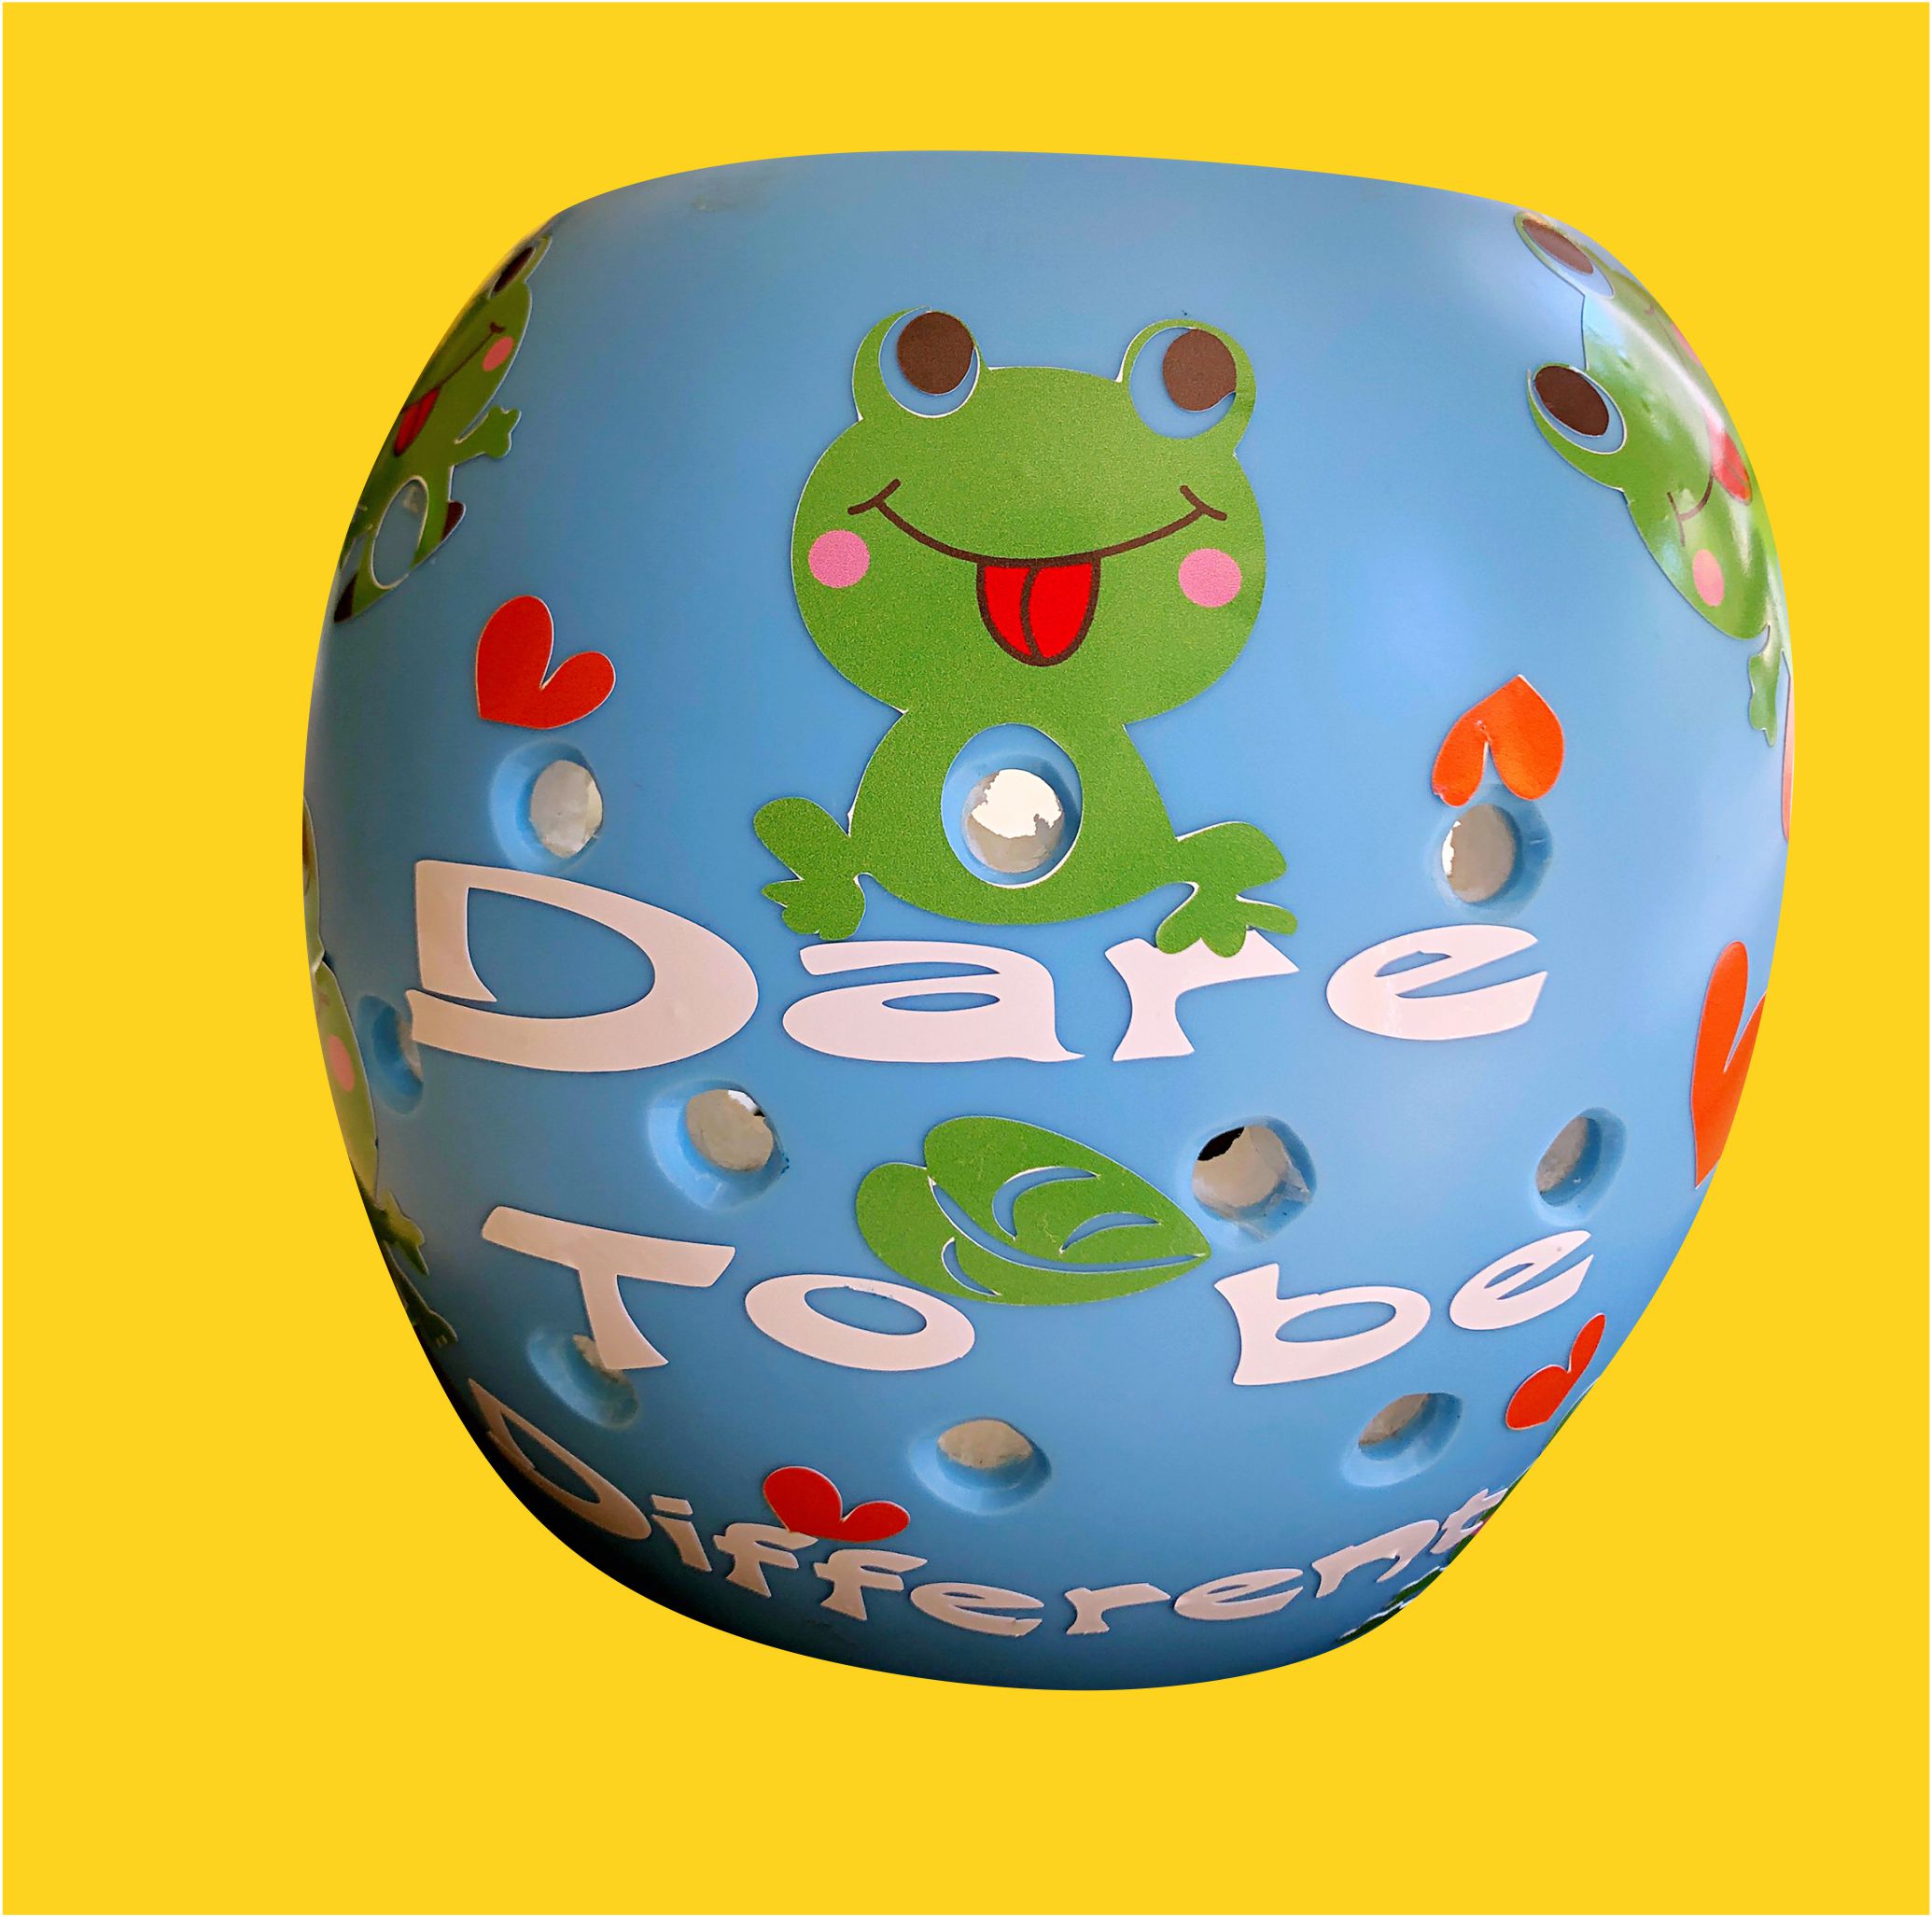 Dare to be different cranial band